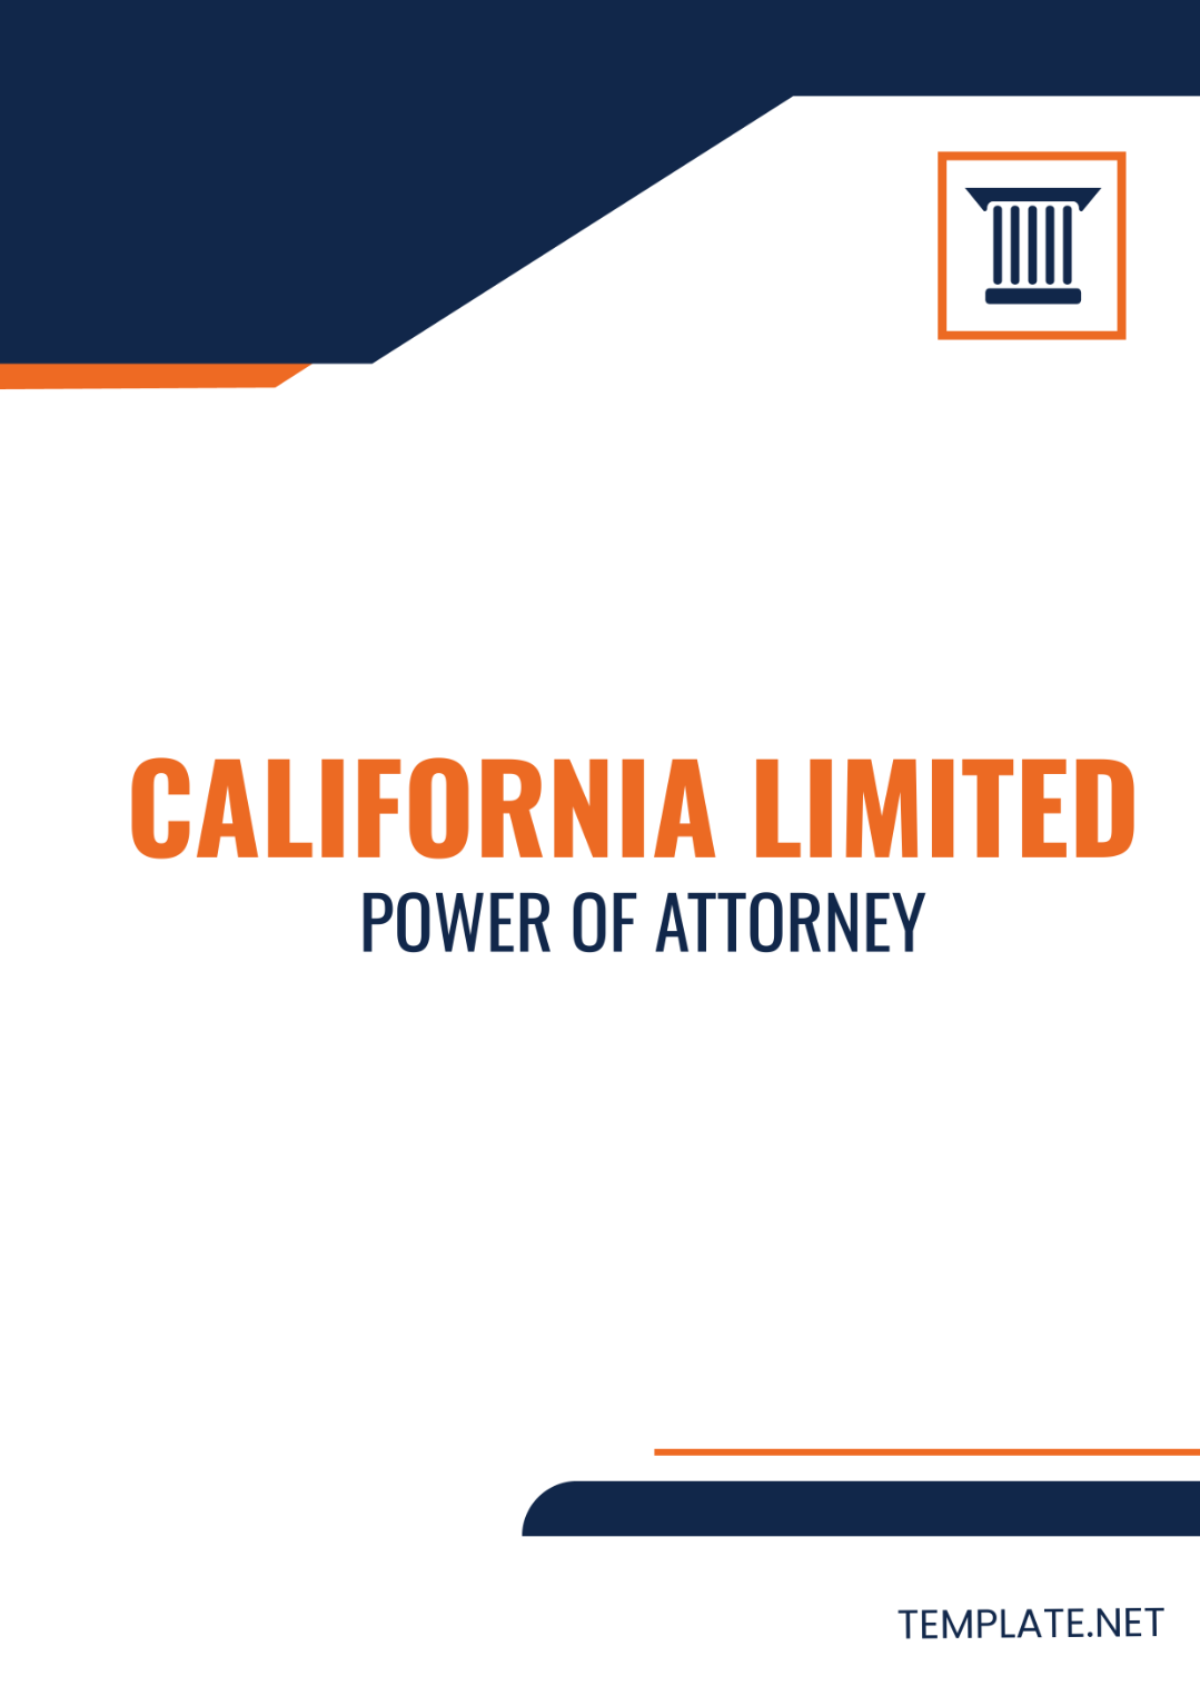 California Limited Power of Attorney Template